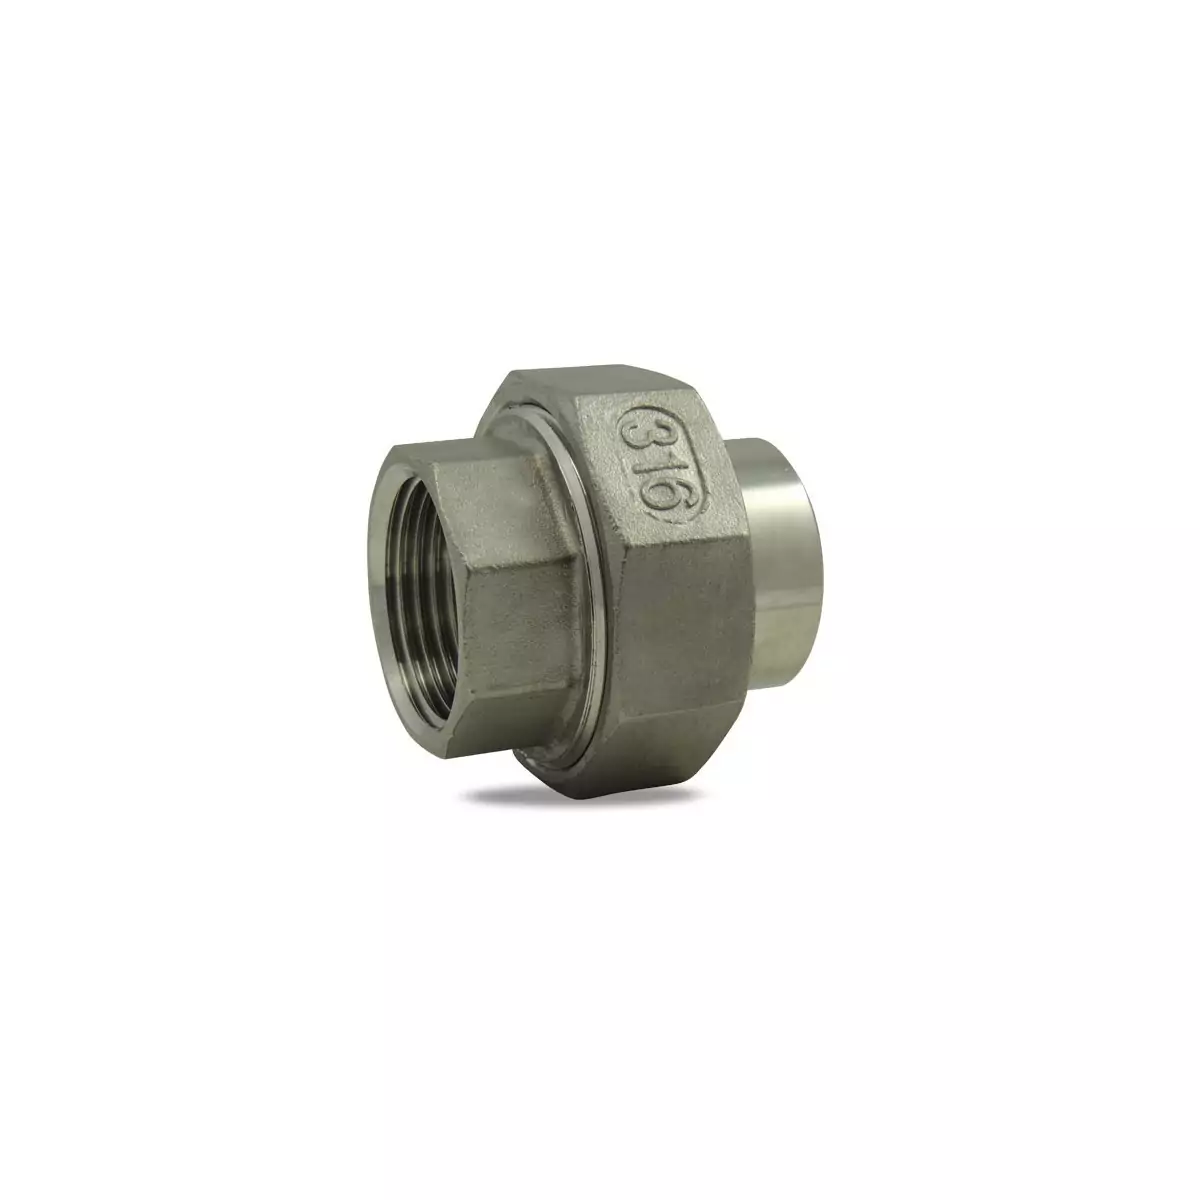 Union with female conical bearing / soldering 316 stainless steel